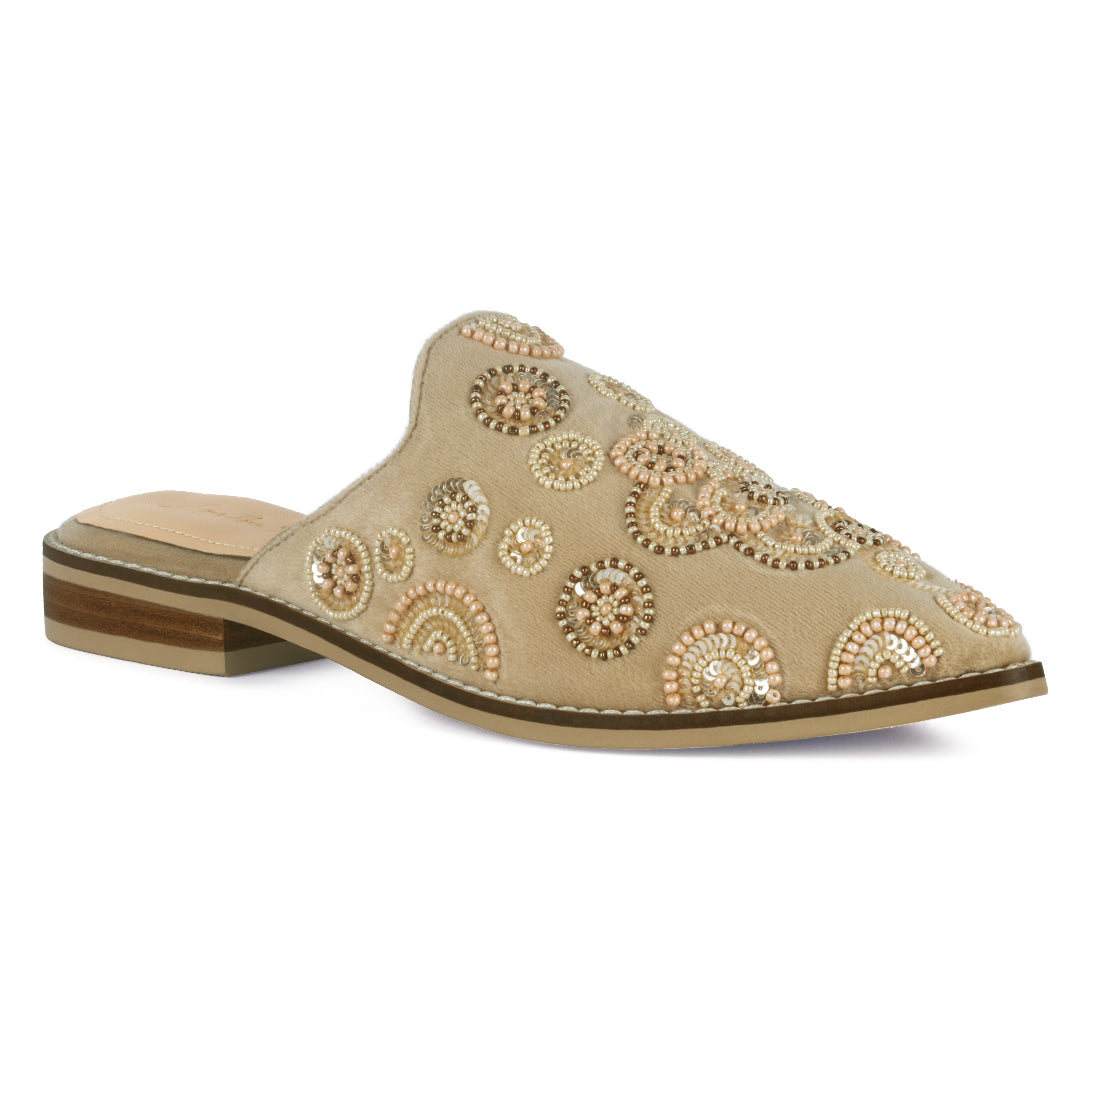 HANDCRAFTED EMBROIDERED VELVET MULES IN BEIGE - Beige